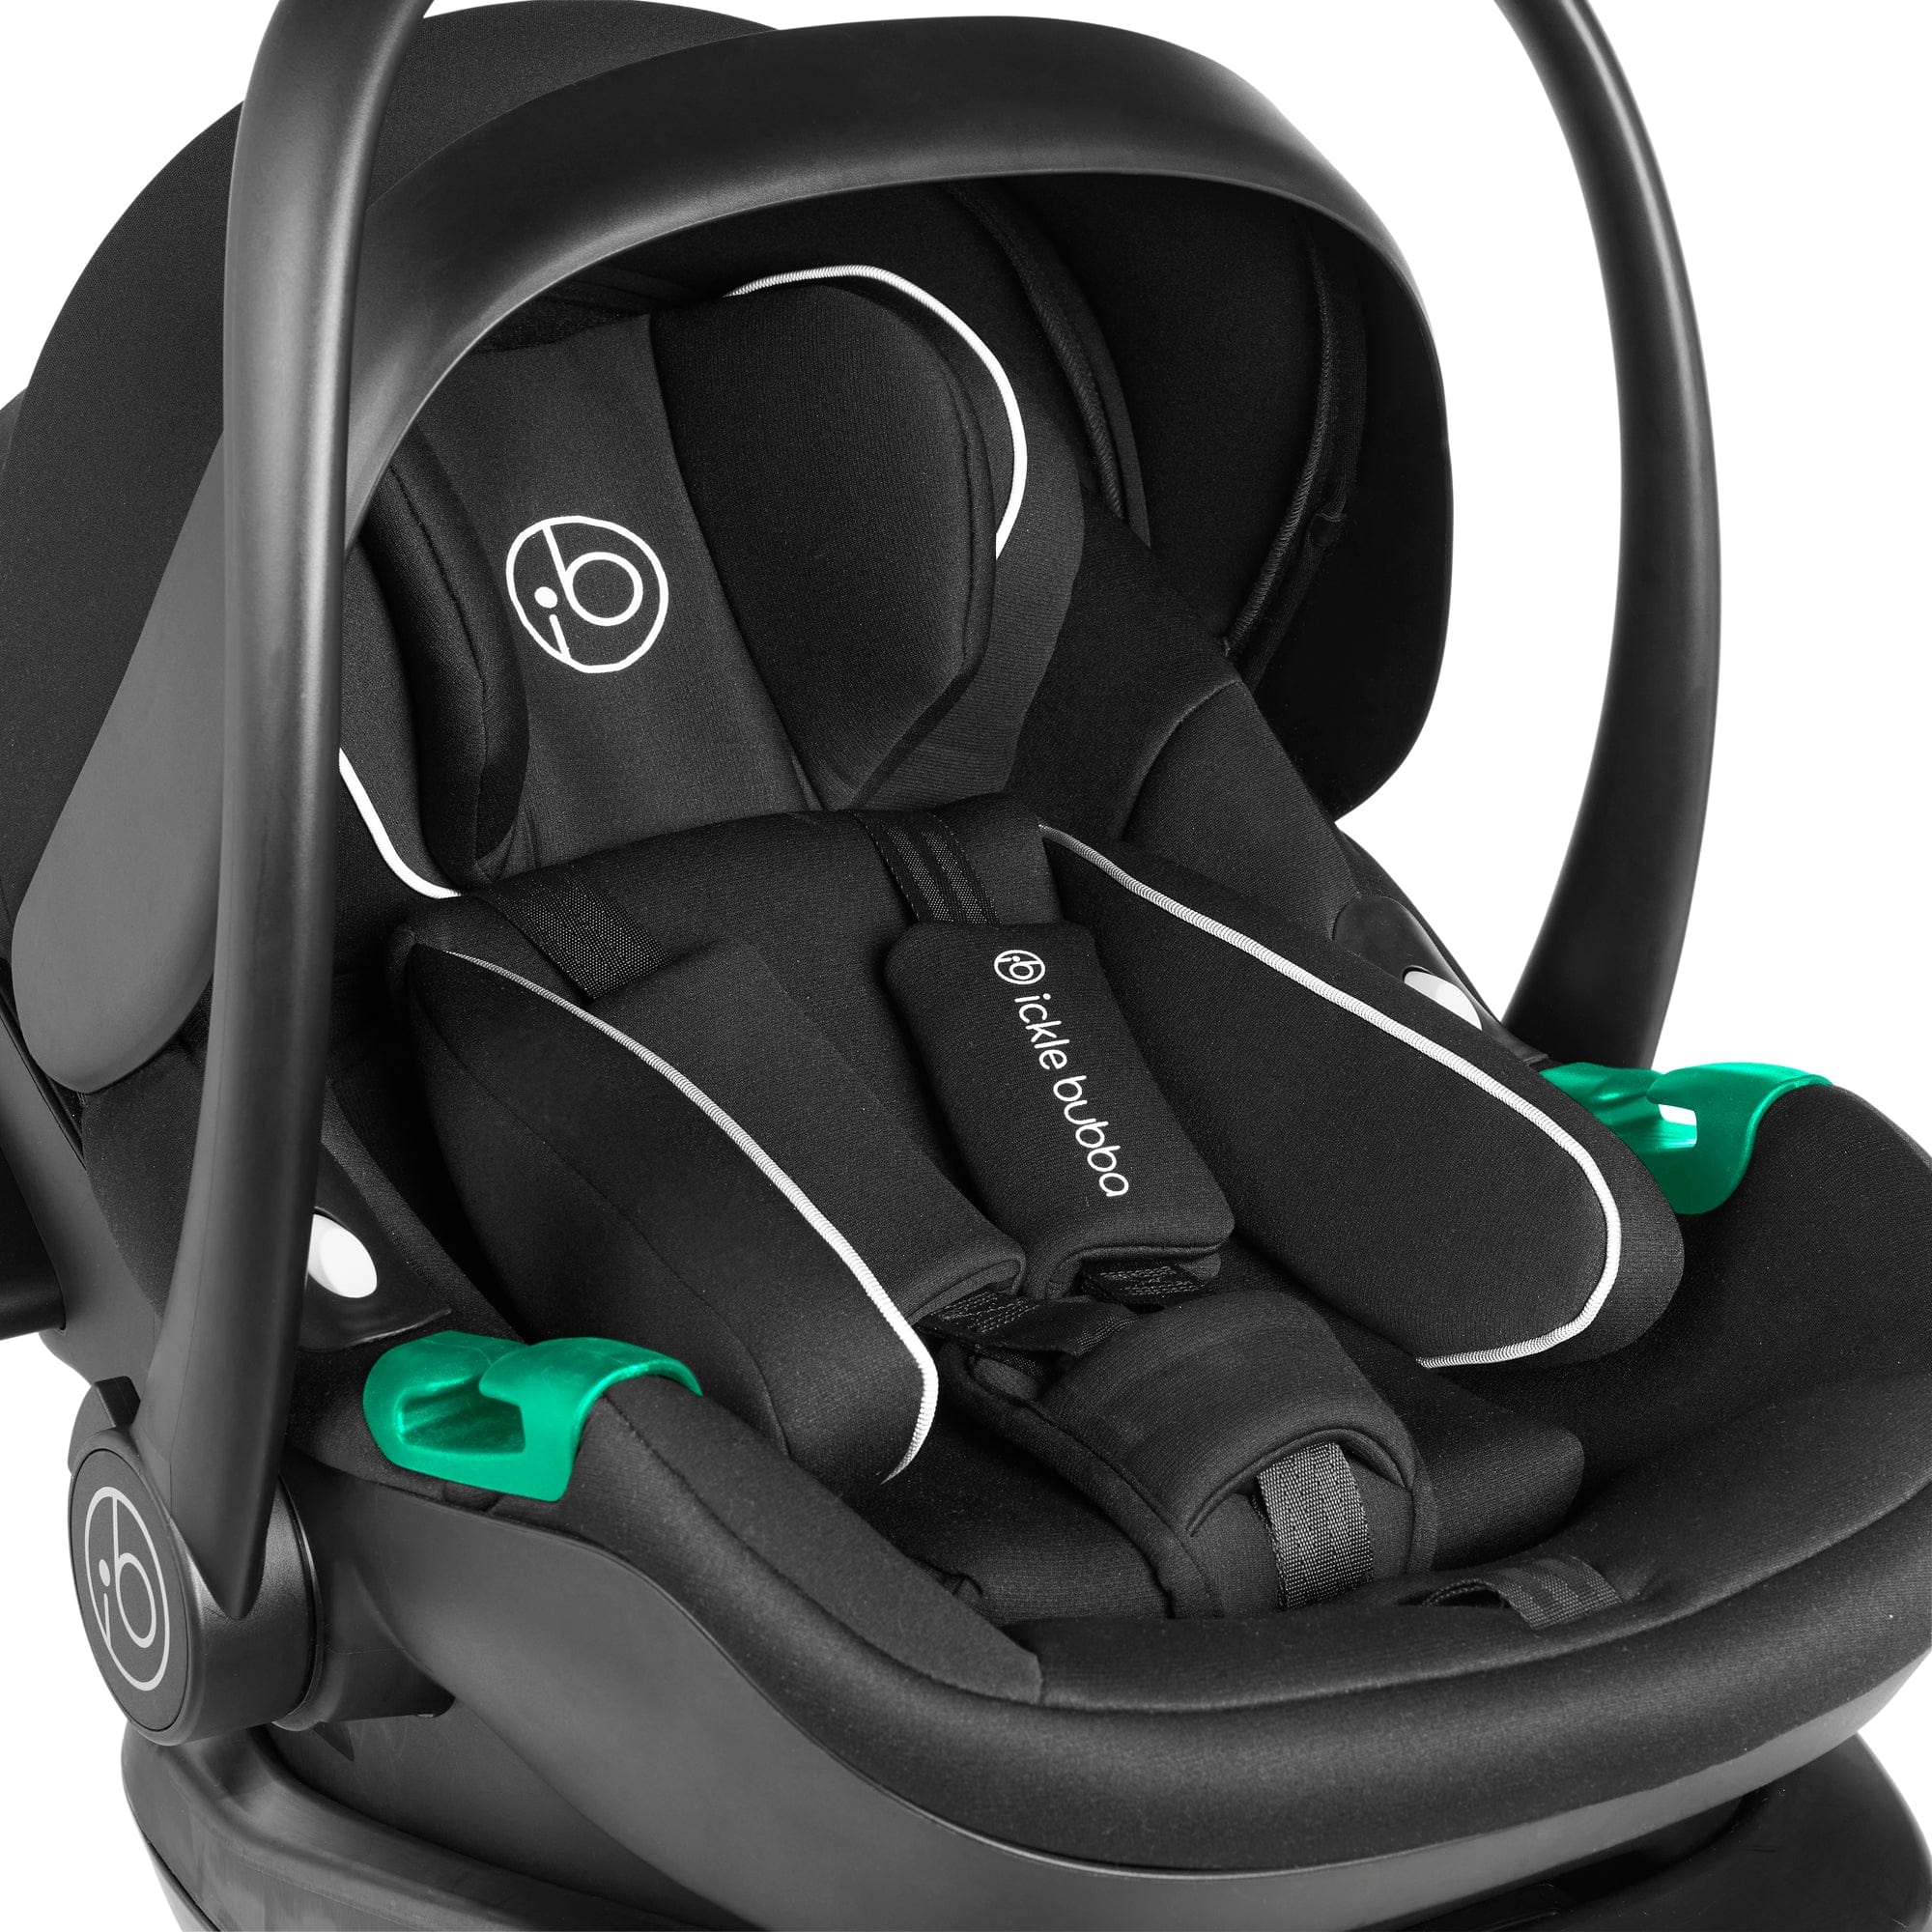 Ickle Bubba 3 wheel pushchairs Ickle Bubba Venus Max Jogger Stroller I-Size Travel System - Black/Black with Isofix Base 13-004-500-001